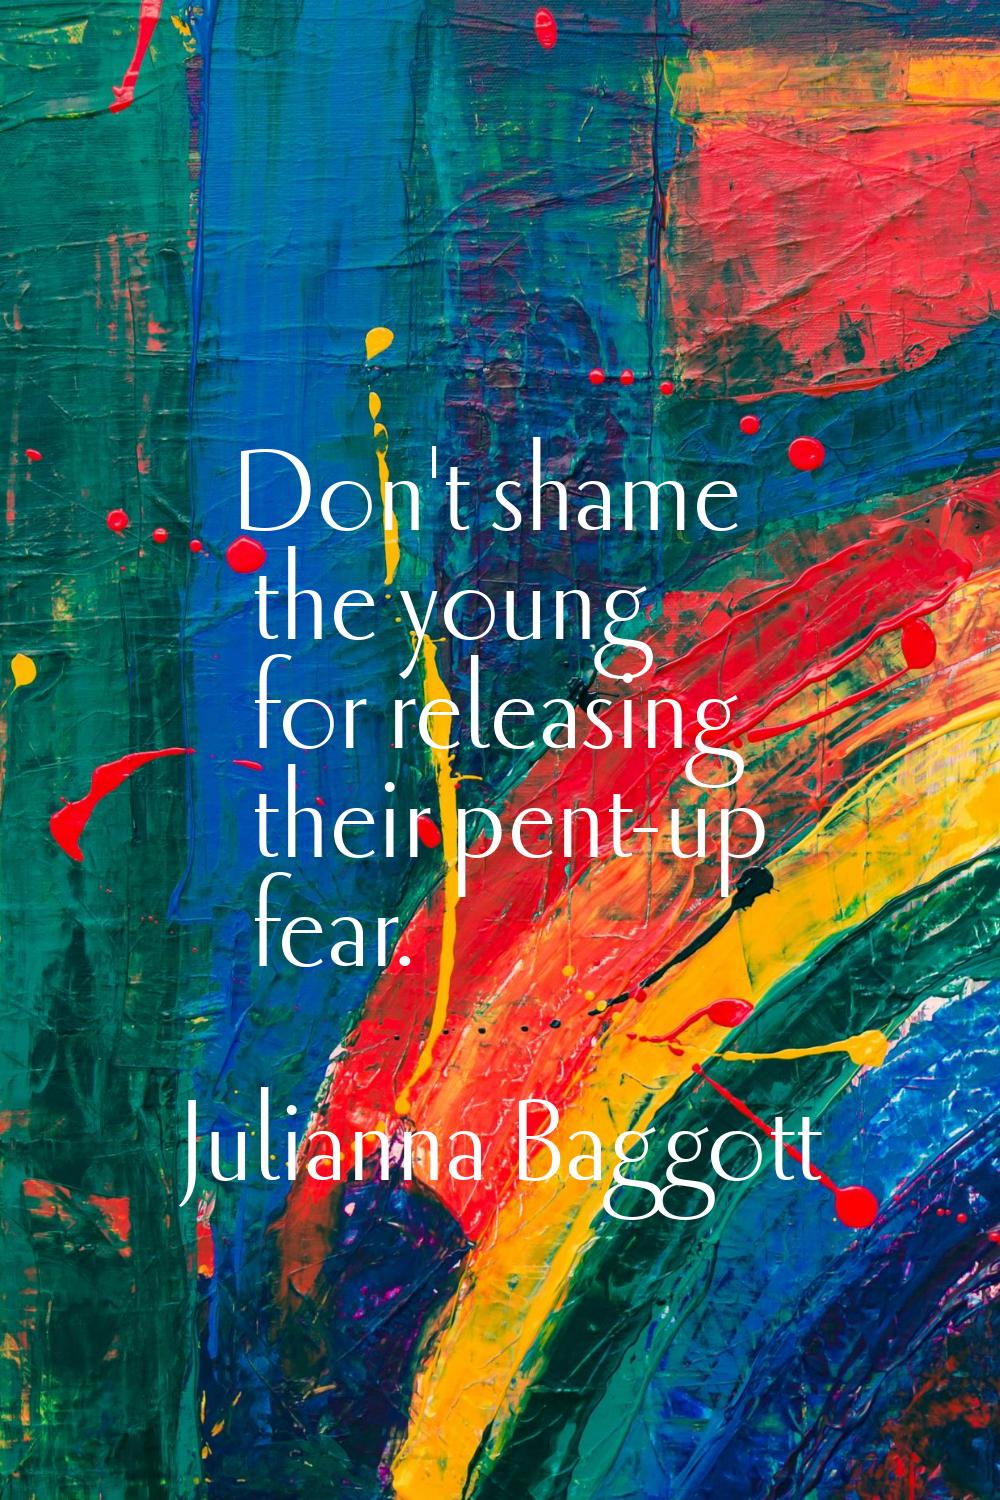 Don't shame the young for releasing their pent-up fear.